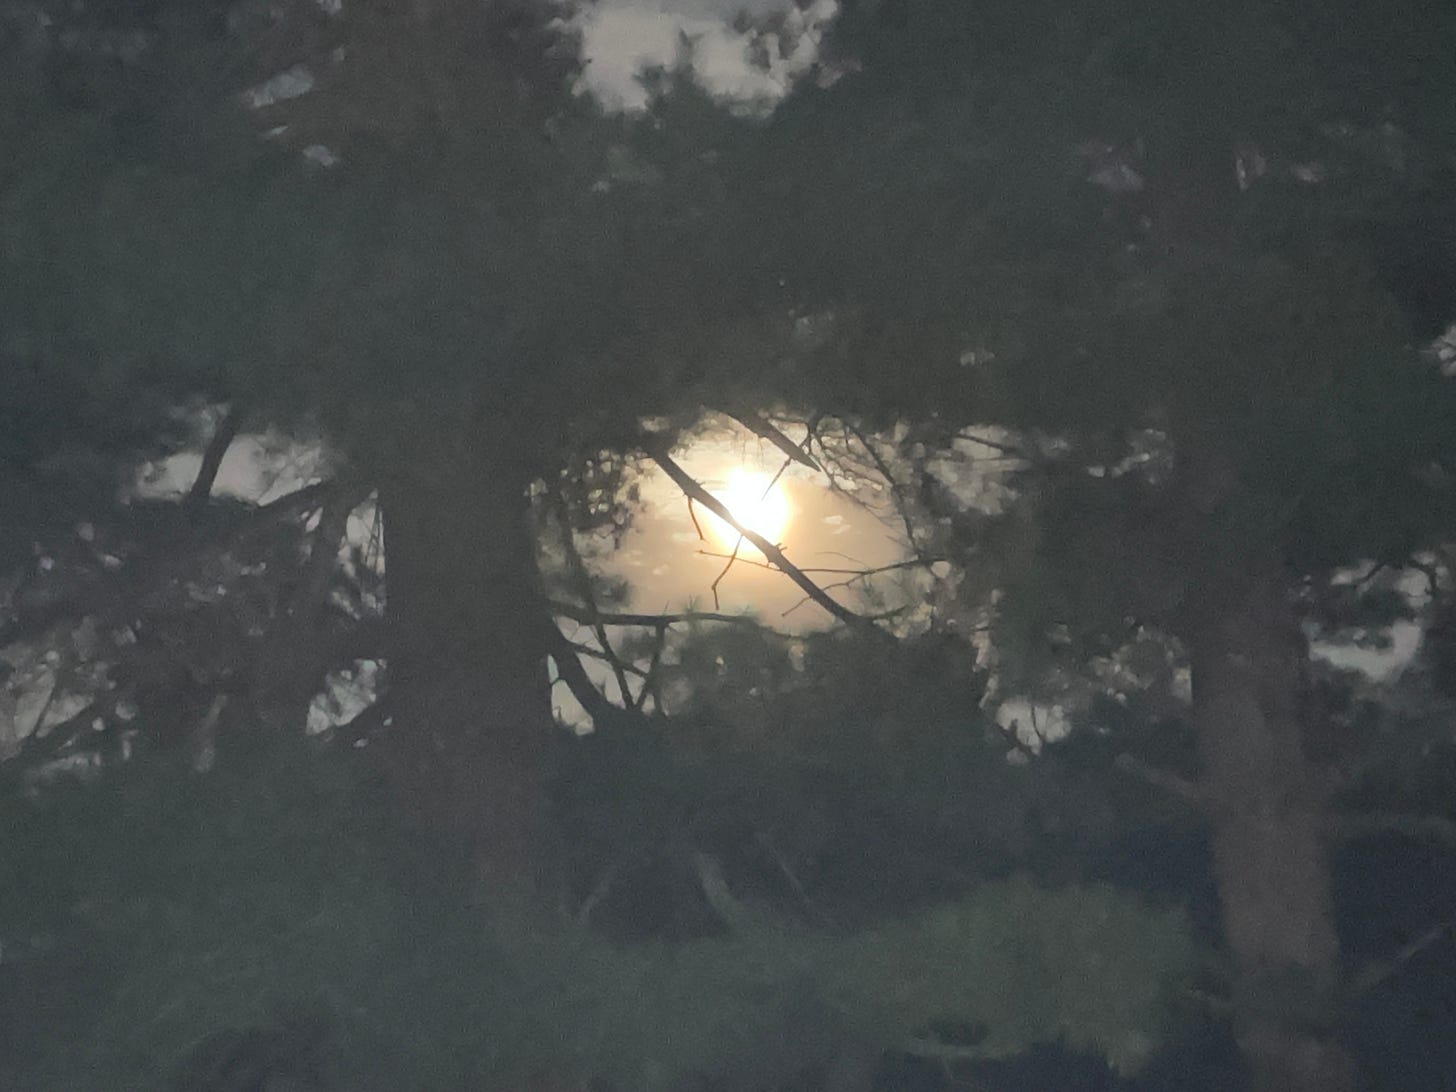 A bright full moon glimpsed through the branches of pine trees.